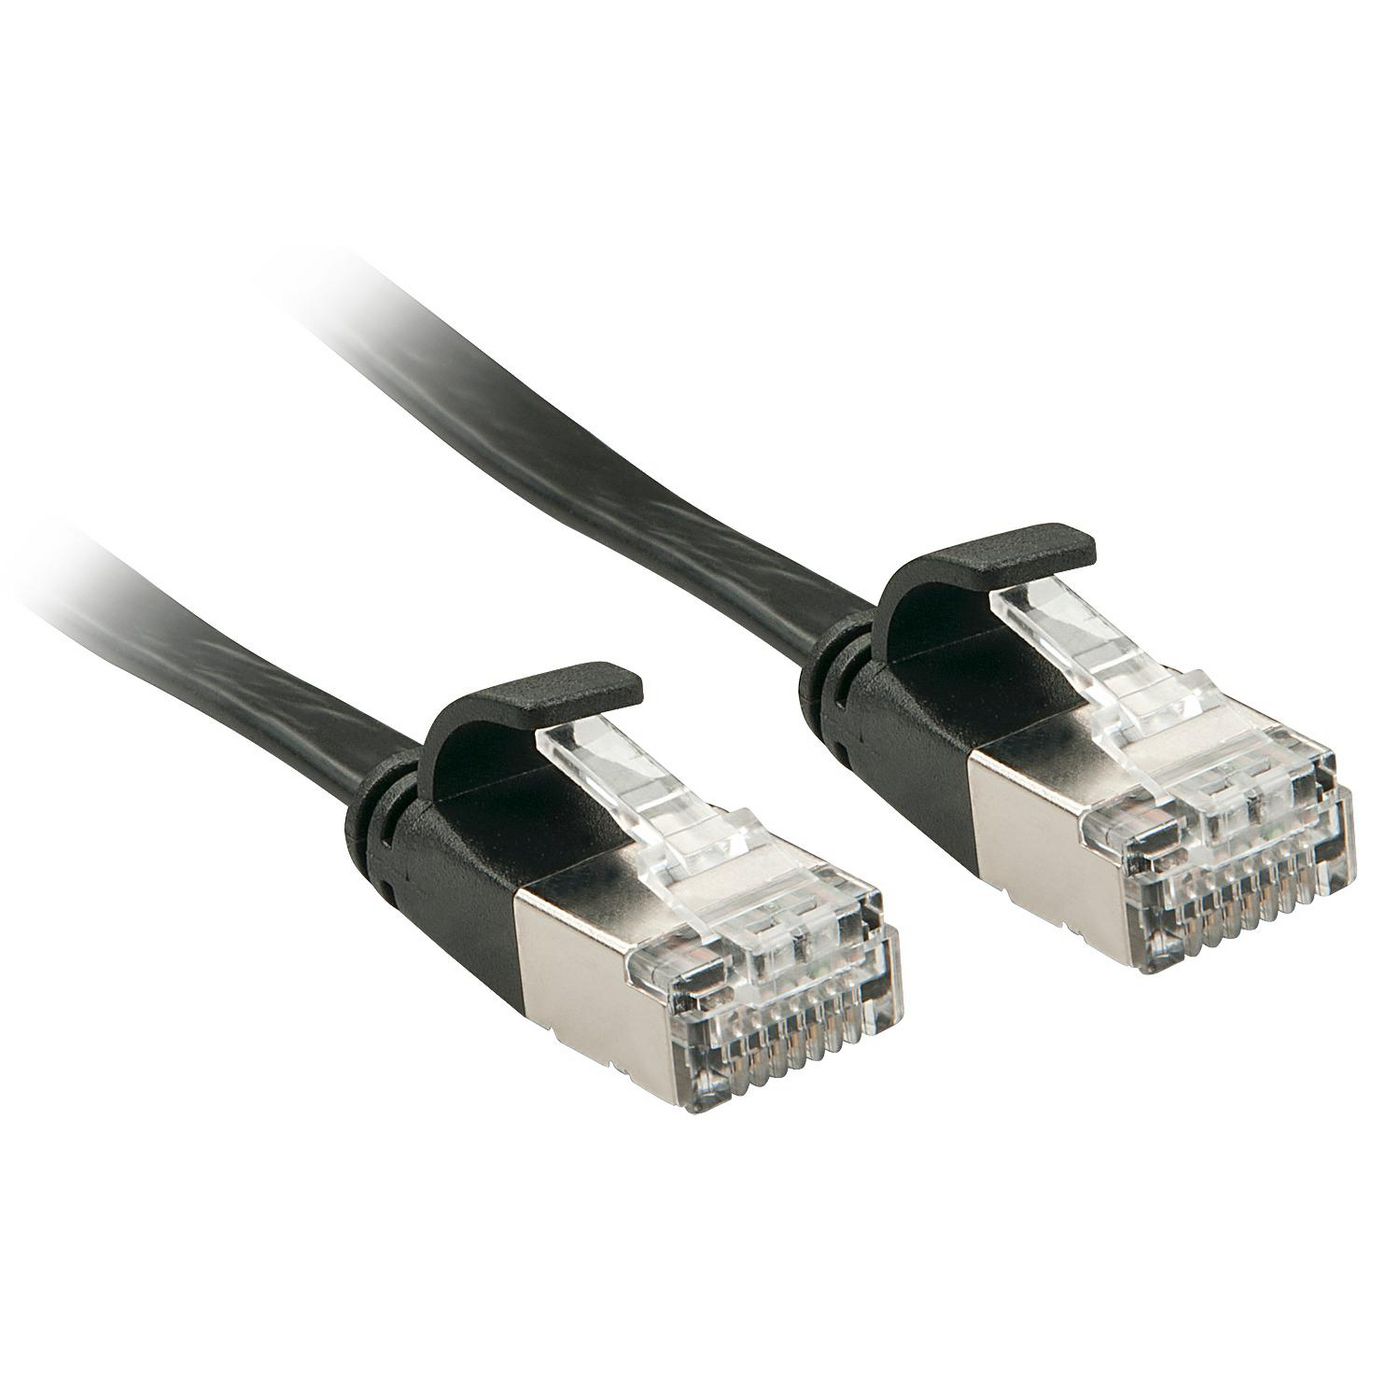 Lindy 47483 W128370975 Networking Cable Black 3 M 